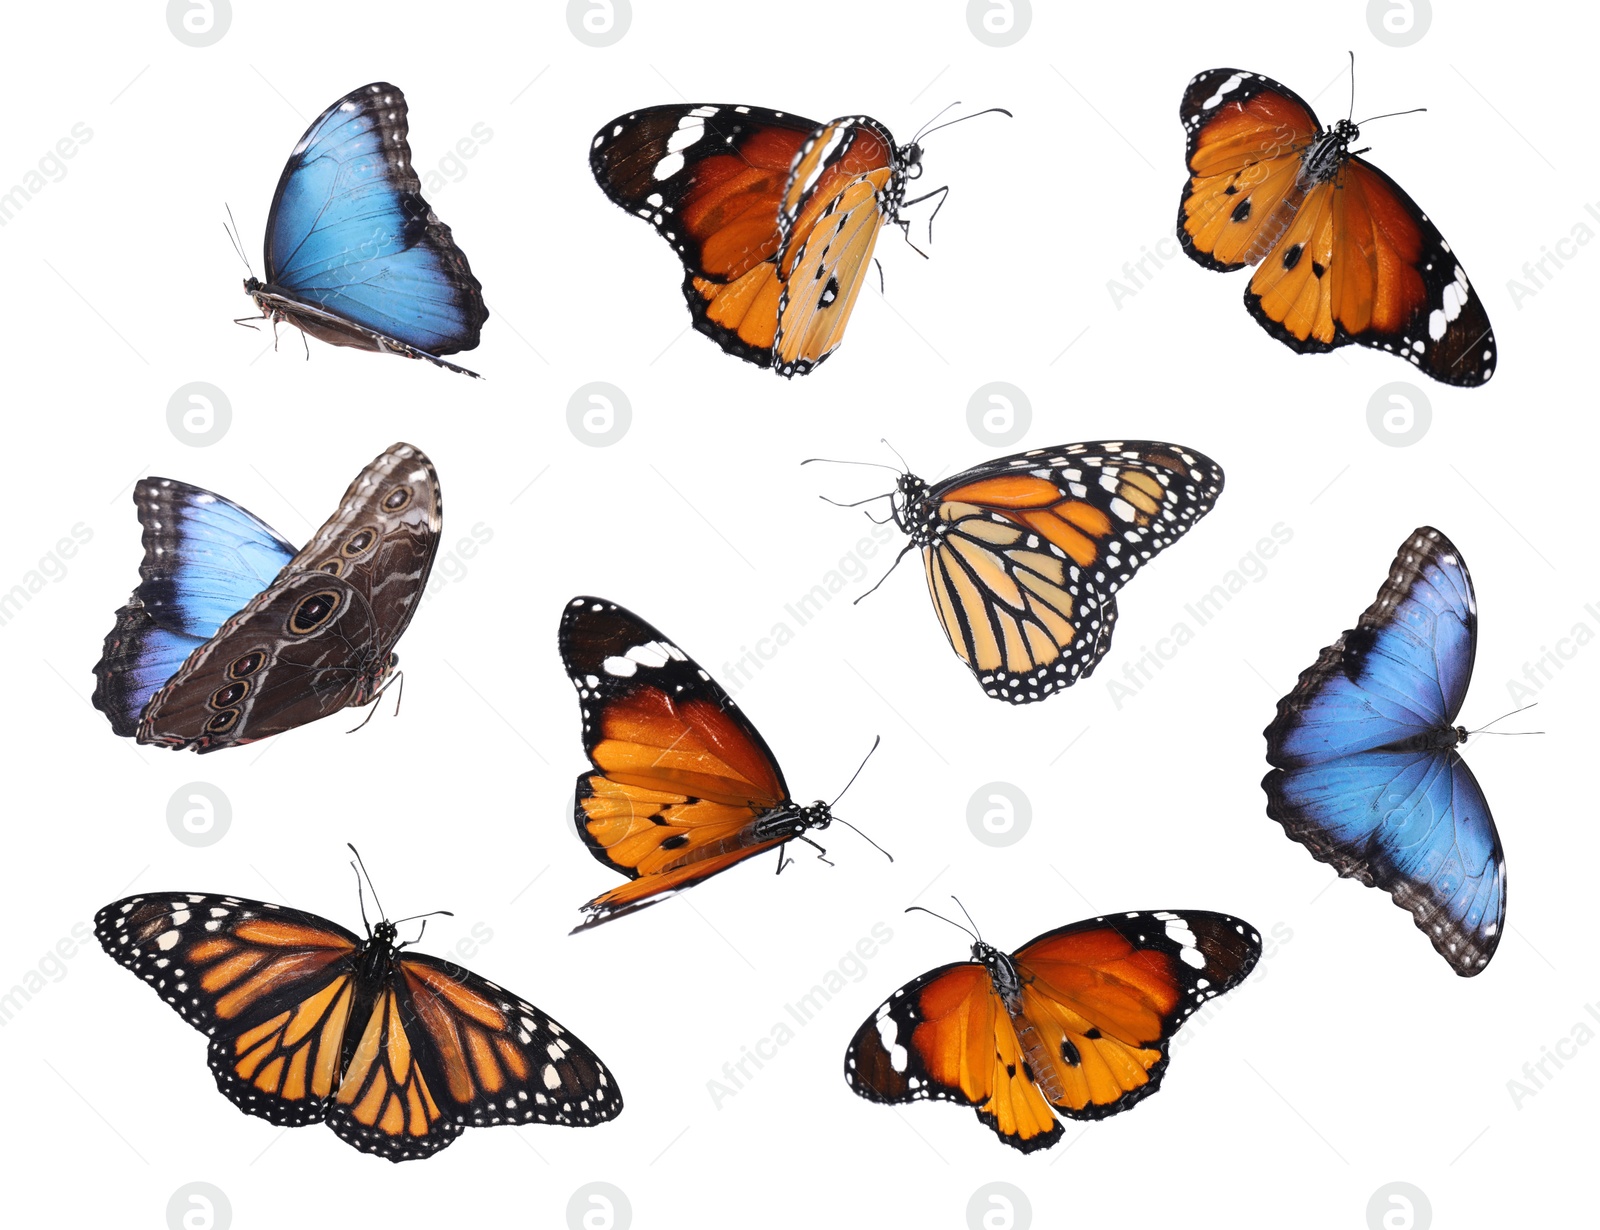 Image of Amazing plain tiger, common morpho and monarch butterflies flying on white background